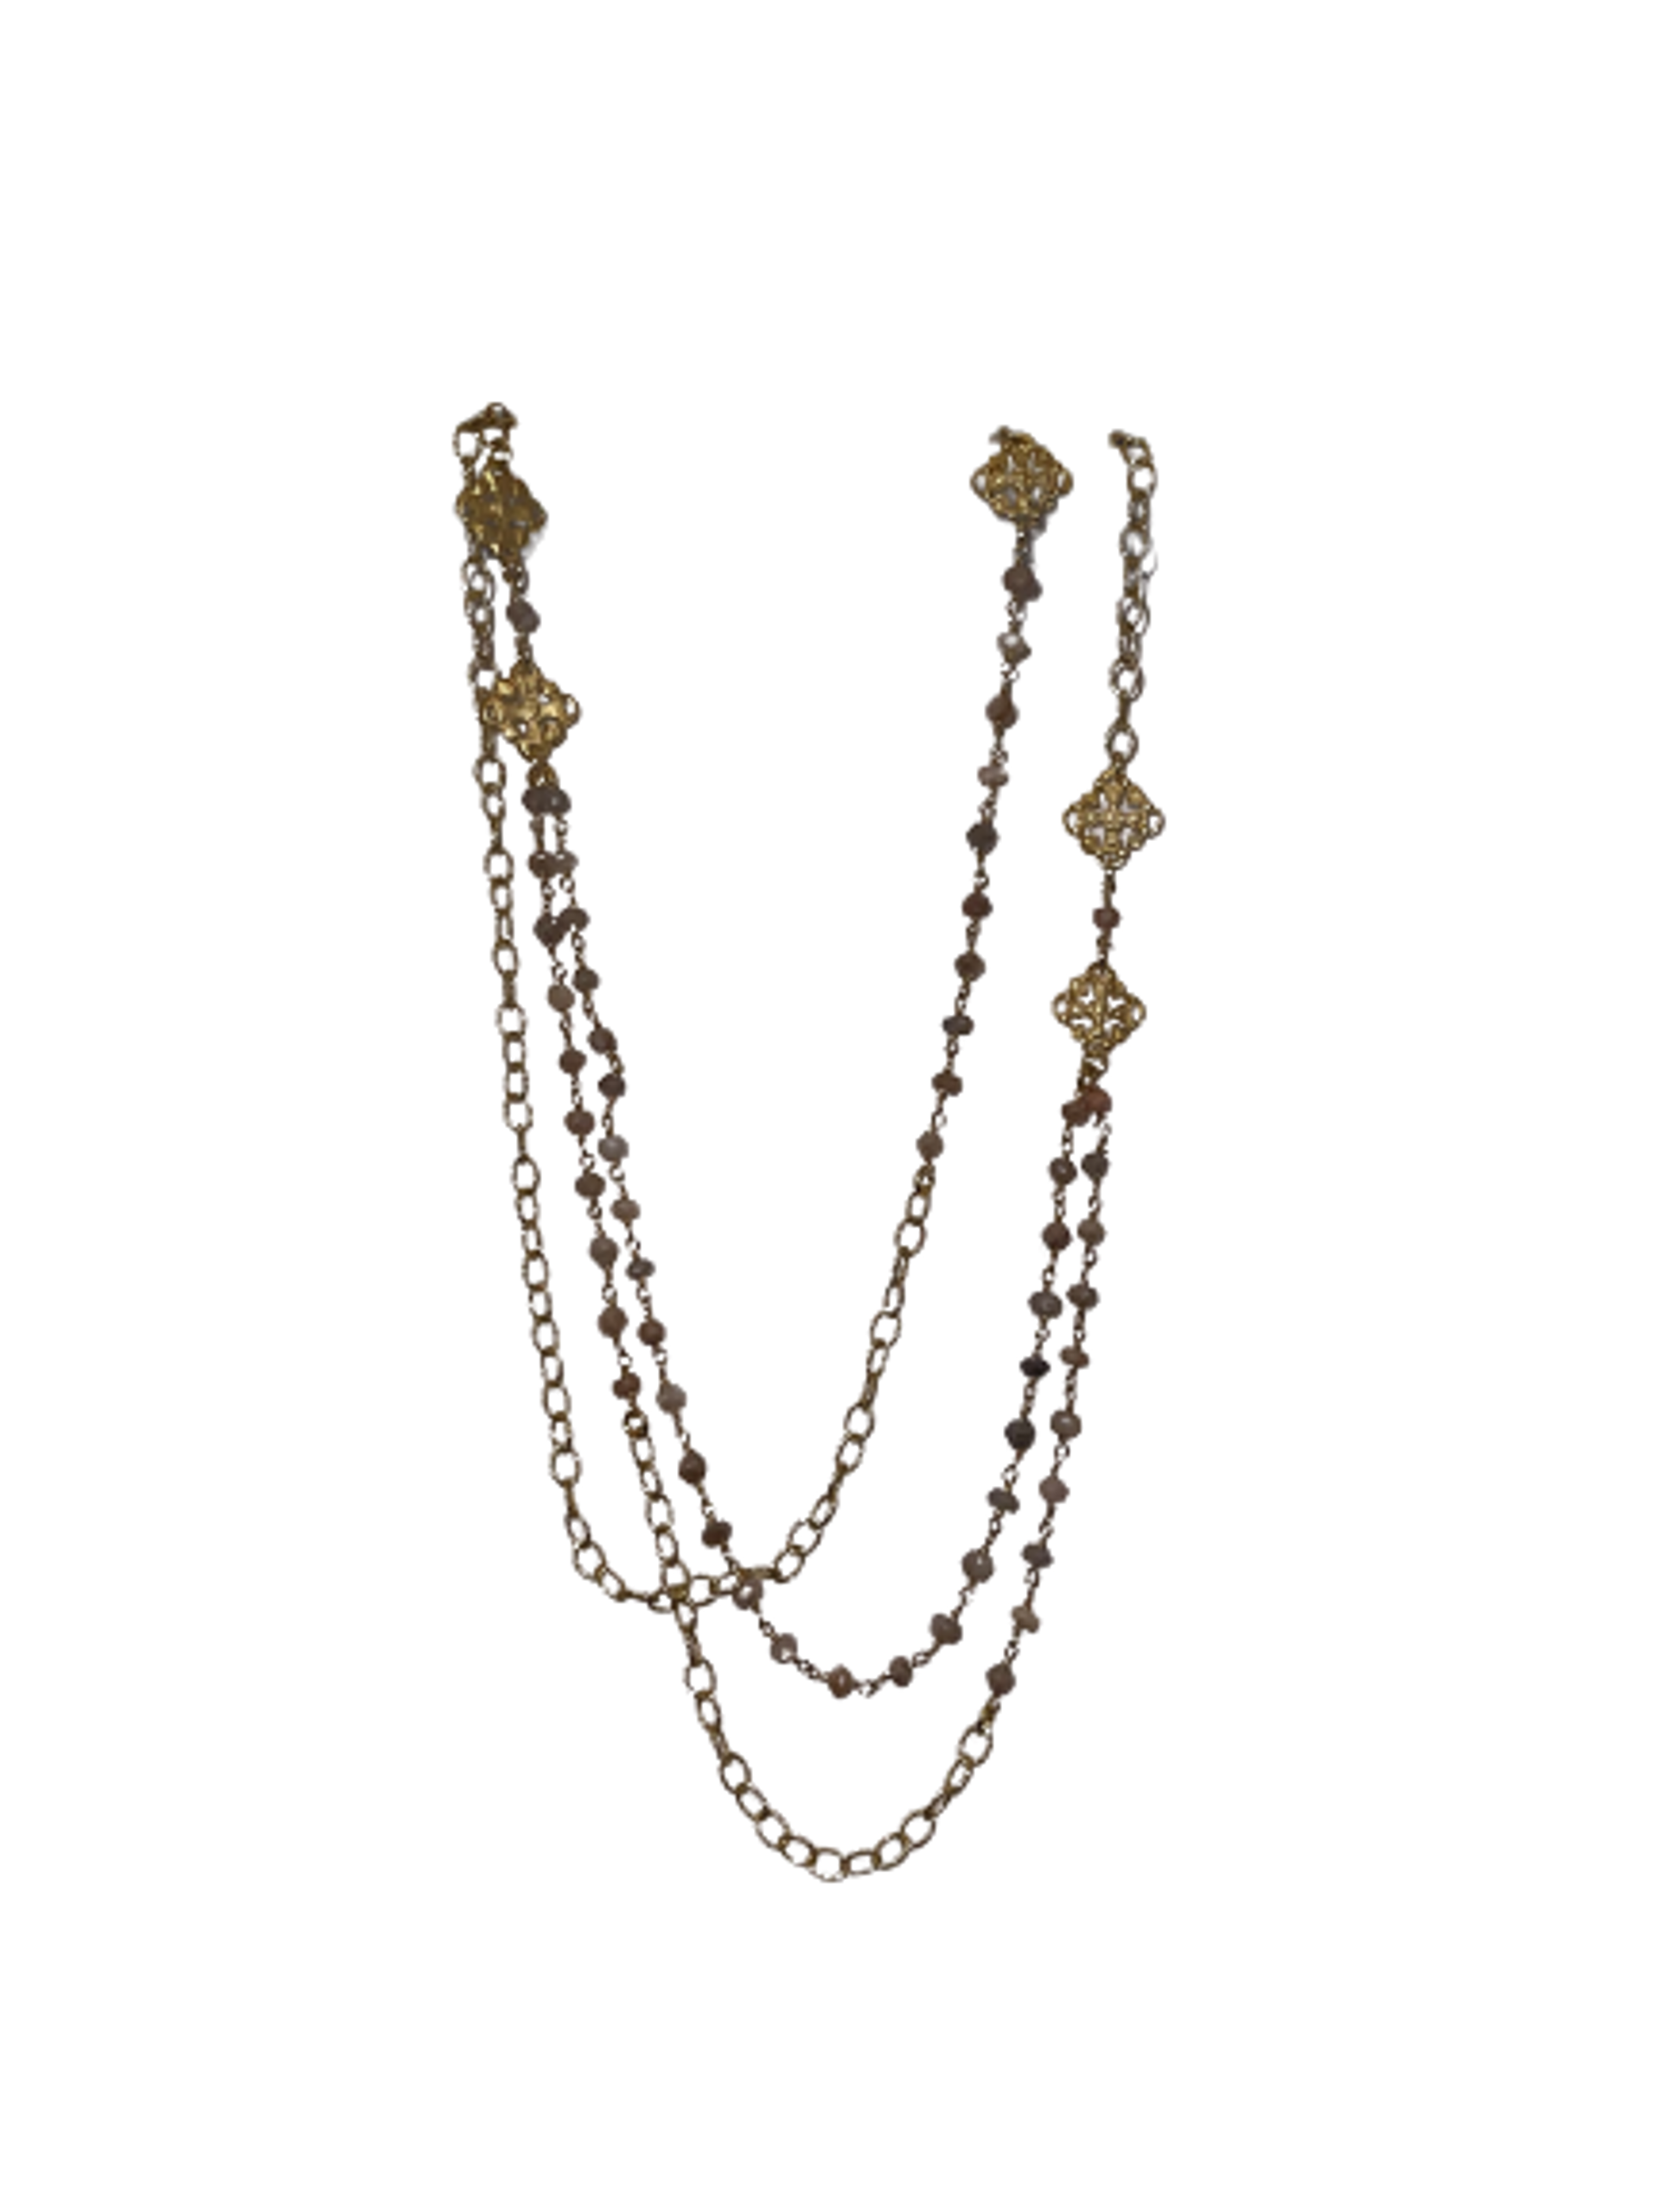 Gold Vermeil and Chocolate Moonstone Delicate Triple Chain Necklace with Vintage Style Filigree Connectors by Karen Birchmier